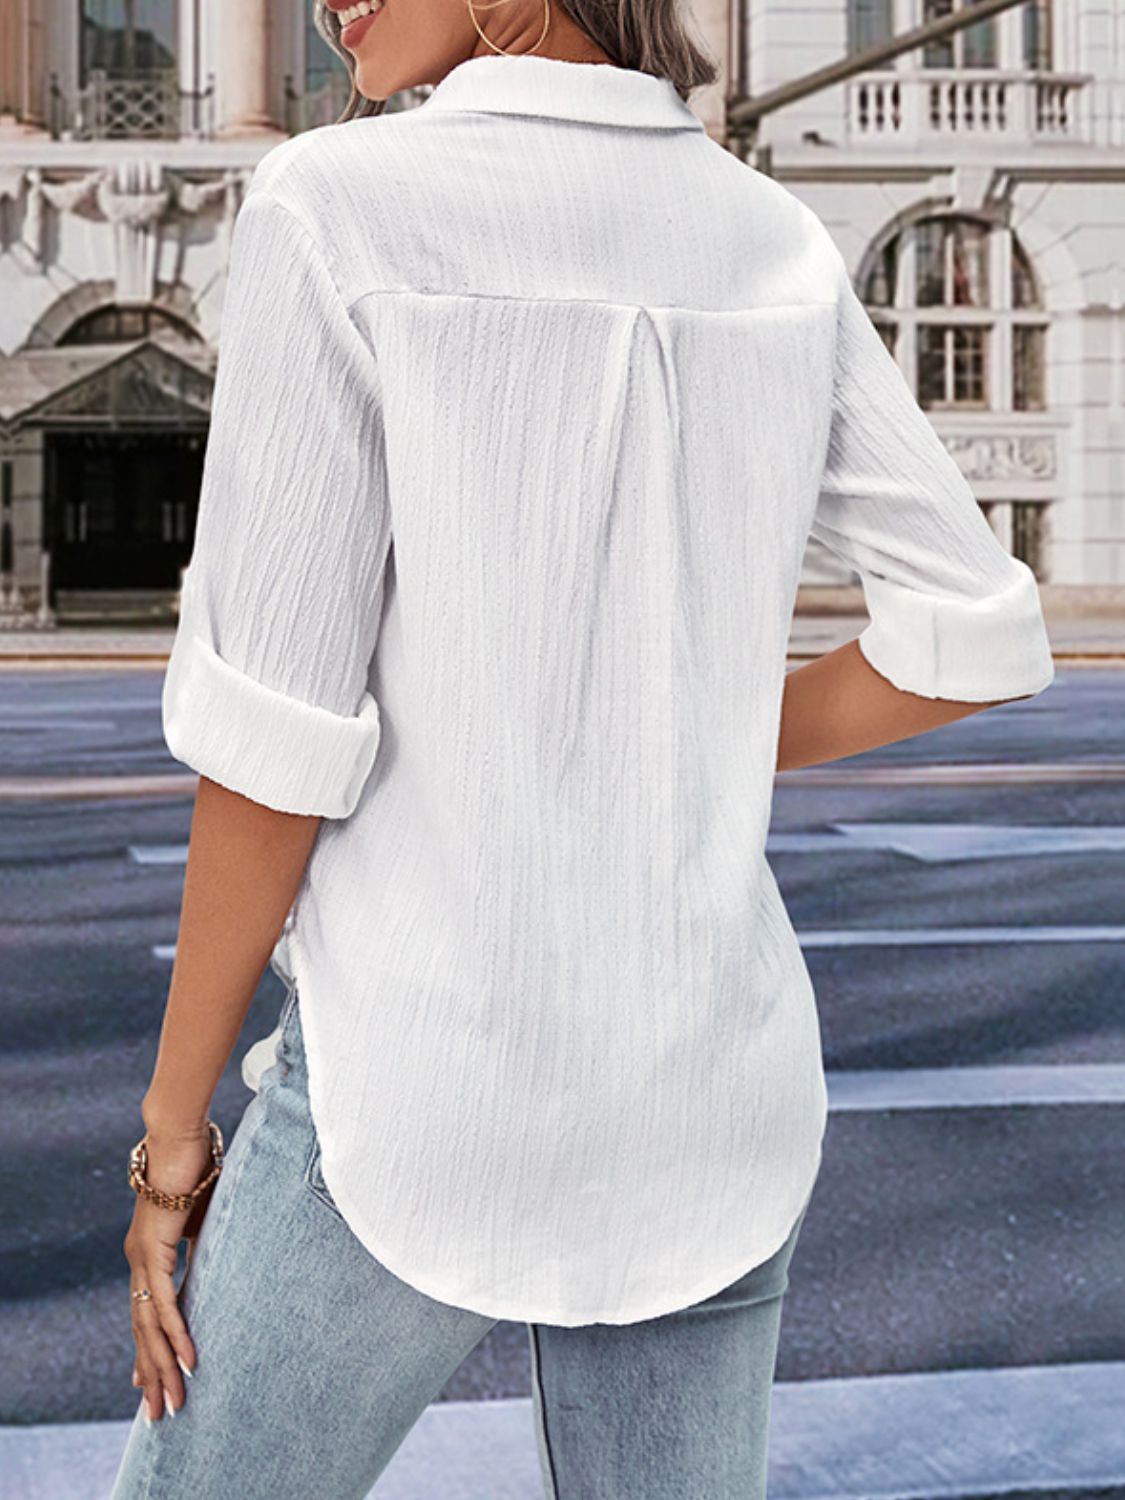 Collared Neck Half Sleeve Twisted Shirt - Online Only